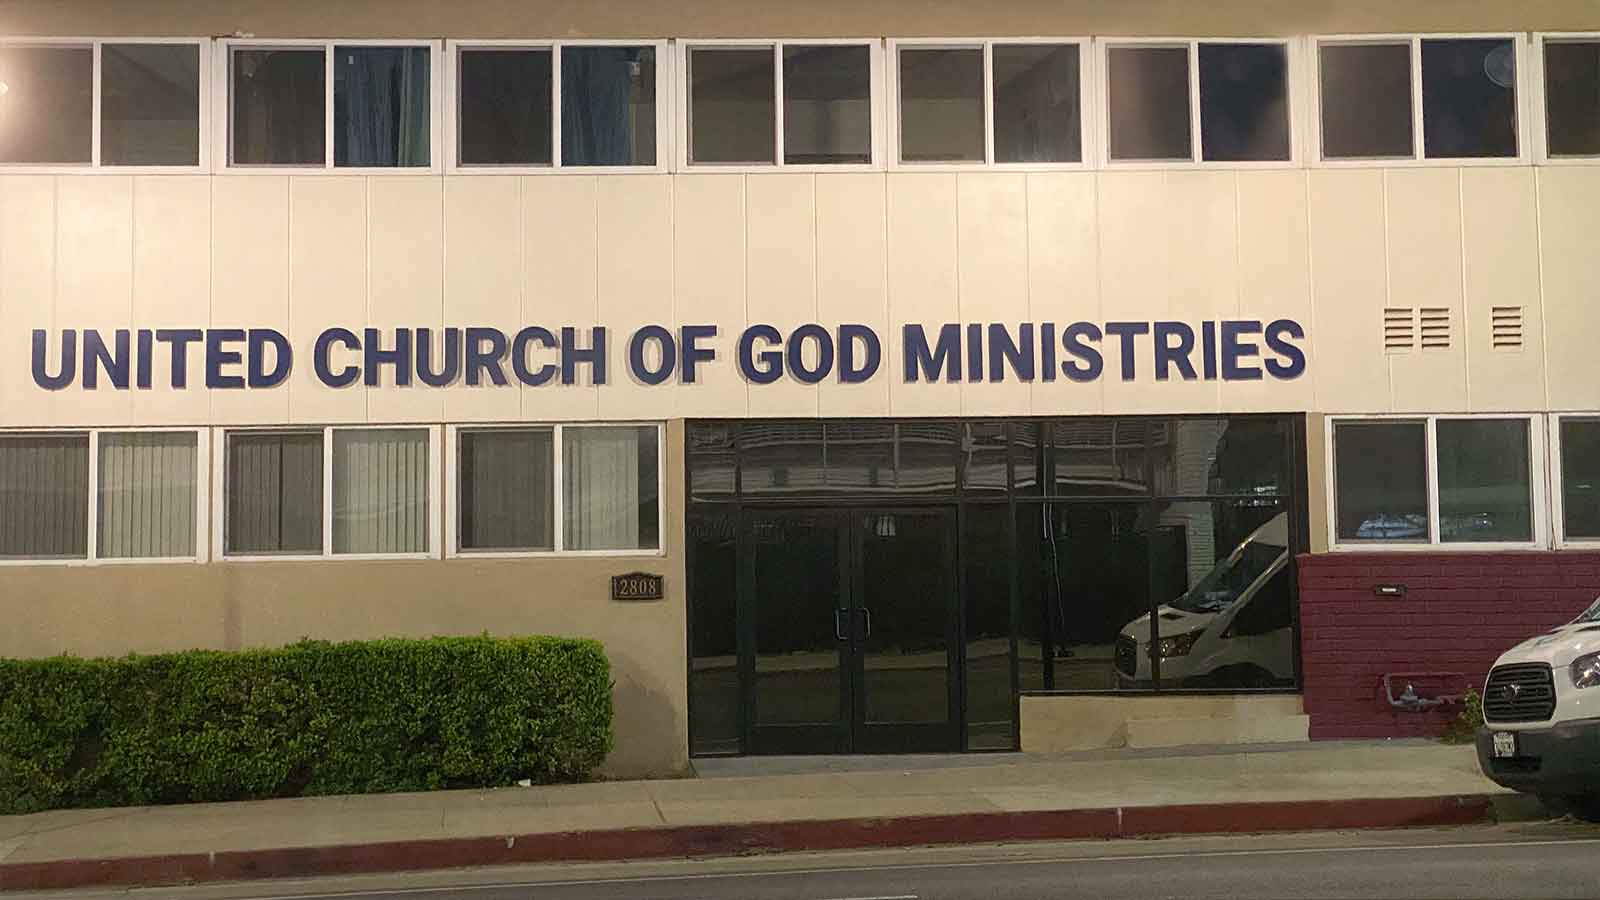 united church of god ministries 3d letters